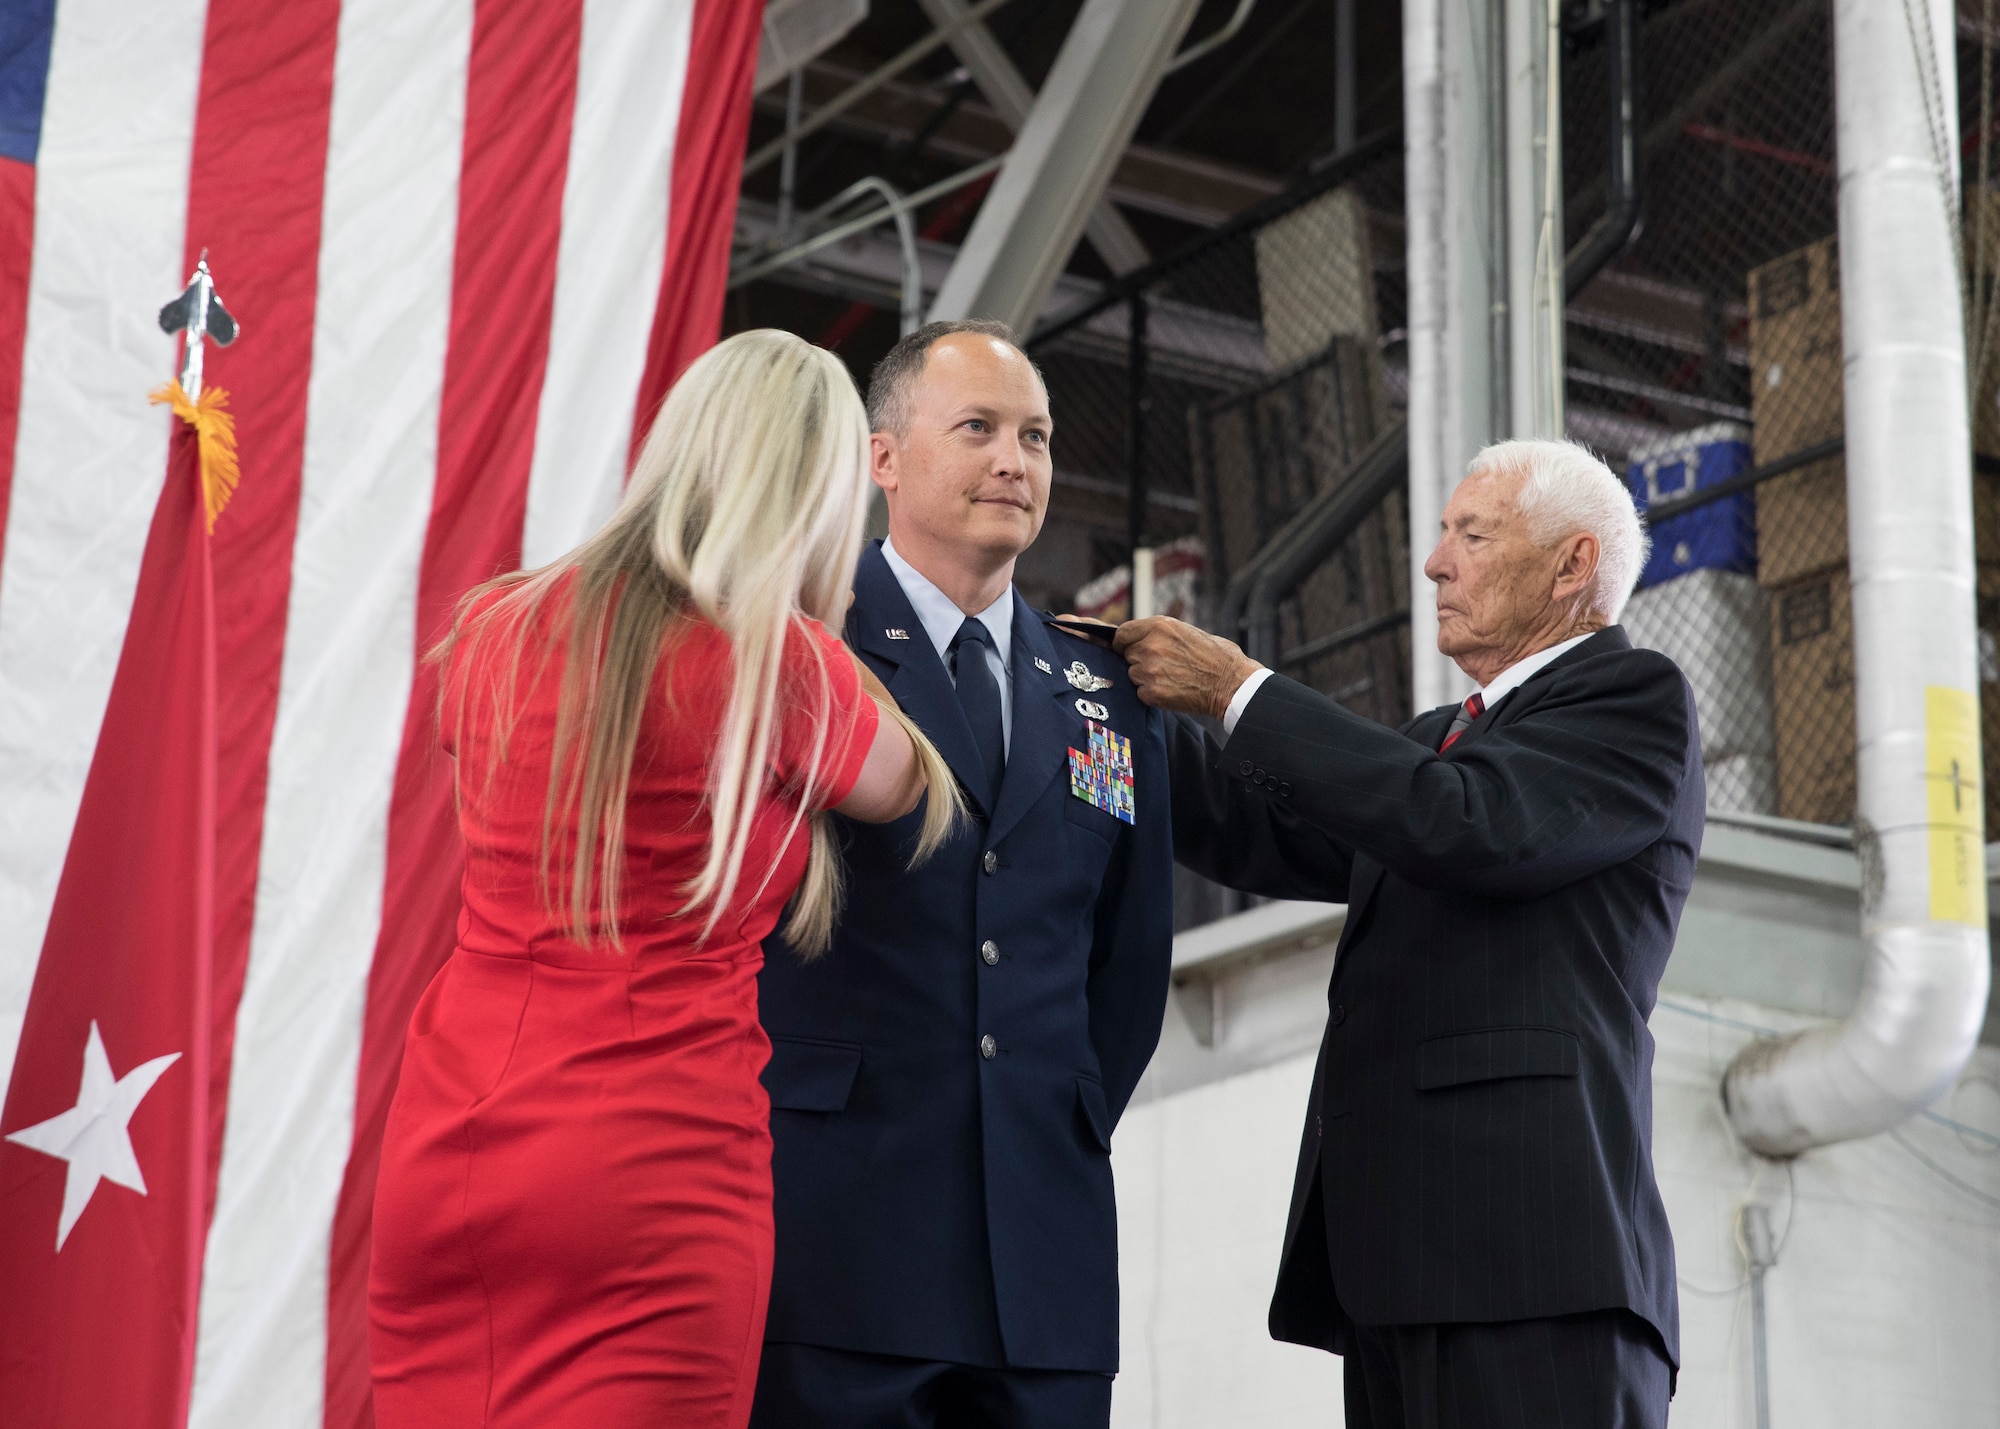 Col. Daniel Boyack, commander Utah Air National Guard, is pinned on by his wife, Michelle and father, Lt. Col (ret) Paul Boyack, as he promotes to the rank of Brigadier General